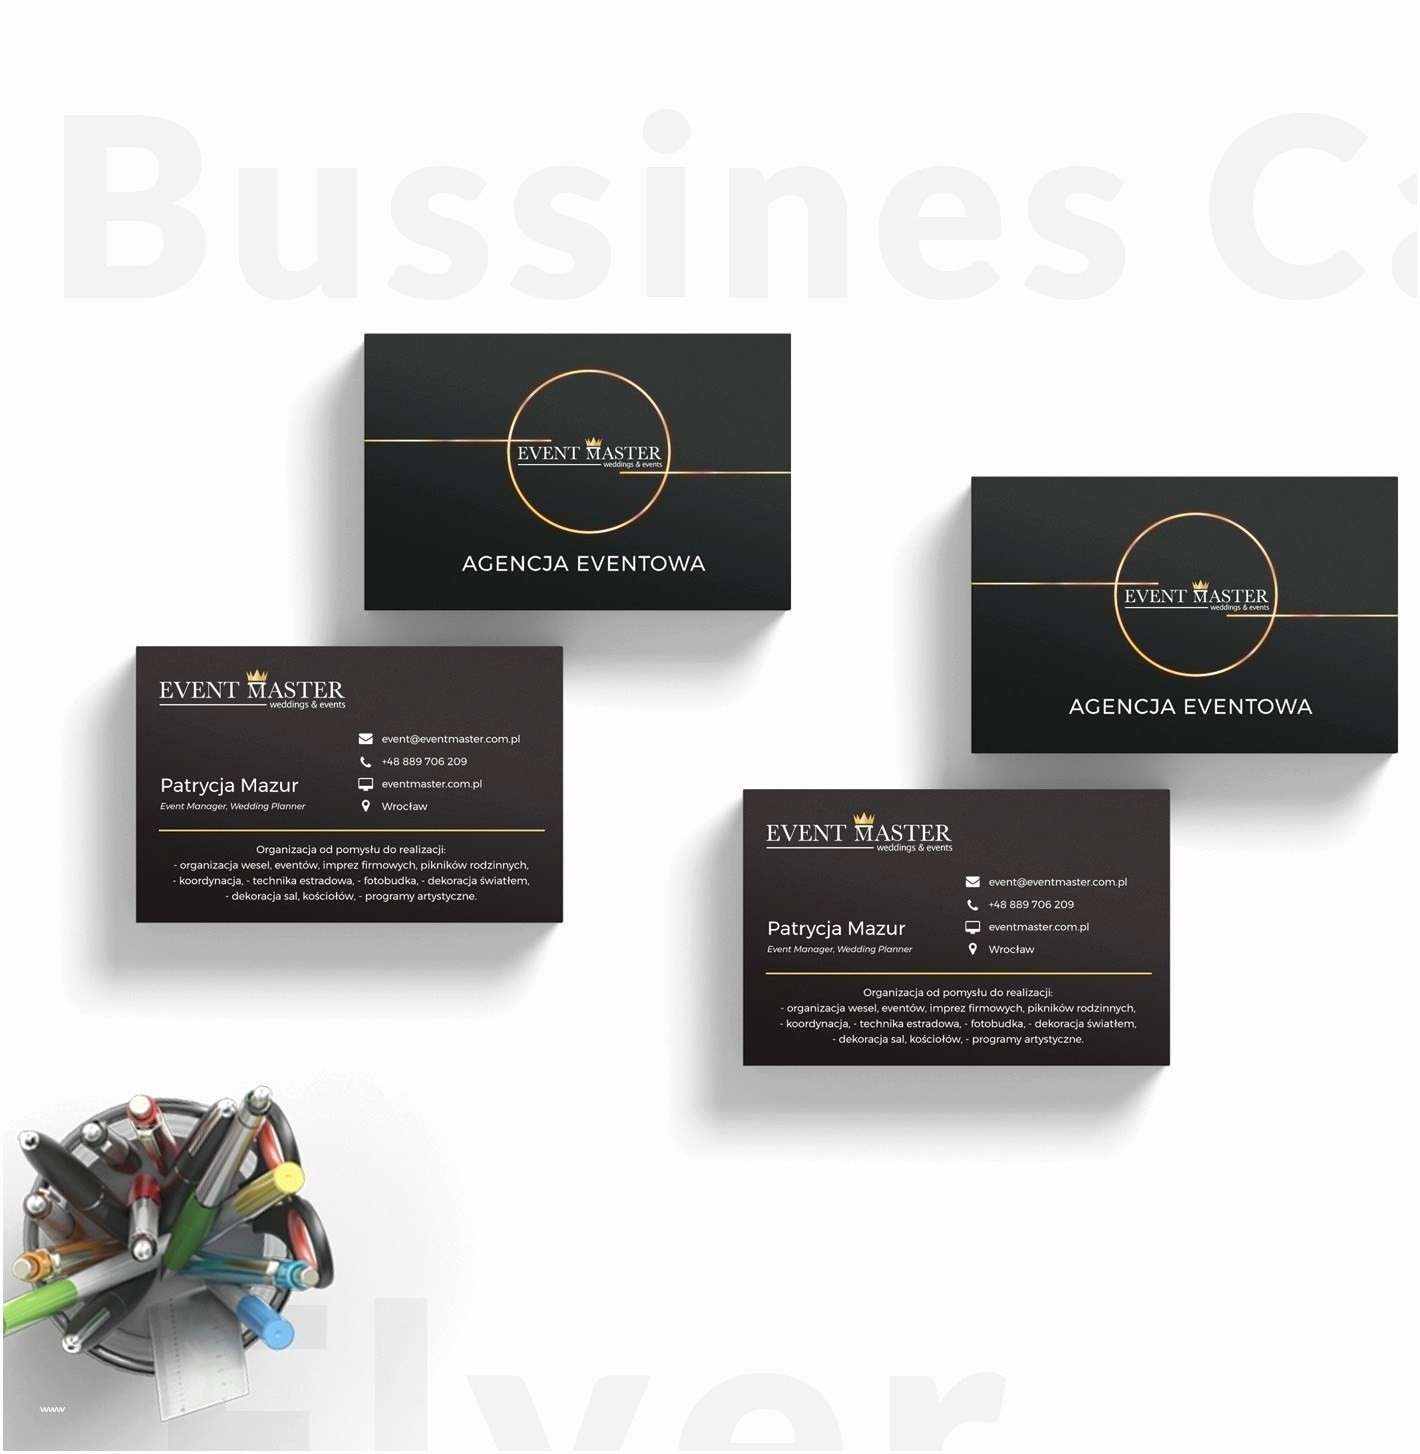 photoshop business card templates new restaurant chef business card template psd creative cards free at of photoshop business card templates